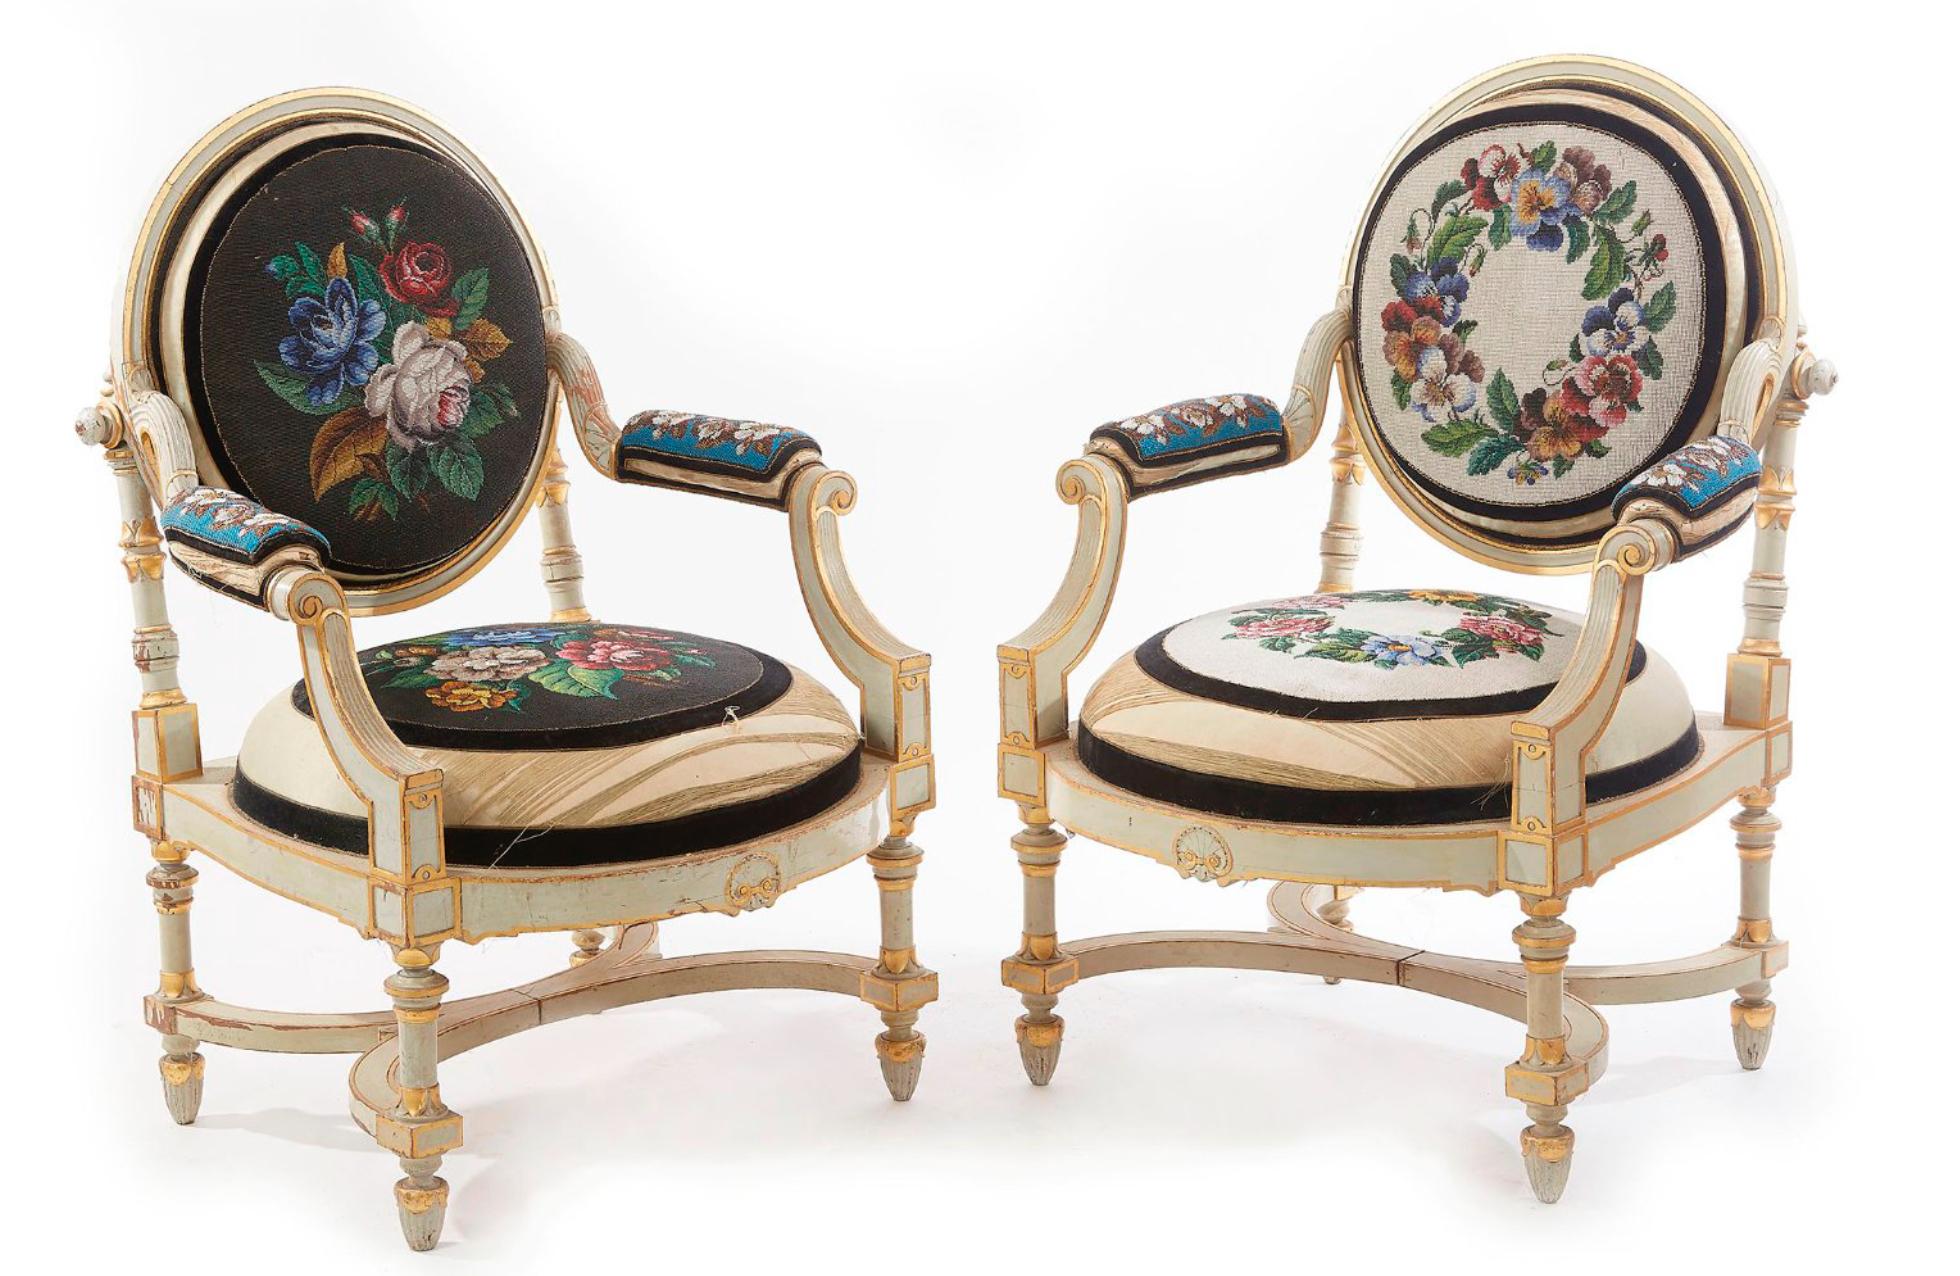 Pair of French armchairs in medallion shape made of hand-carved and painted wood with beautiful details and amazing upholstery.
France, circa 1860.